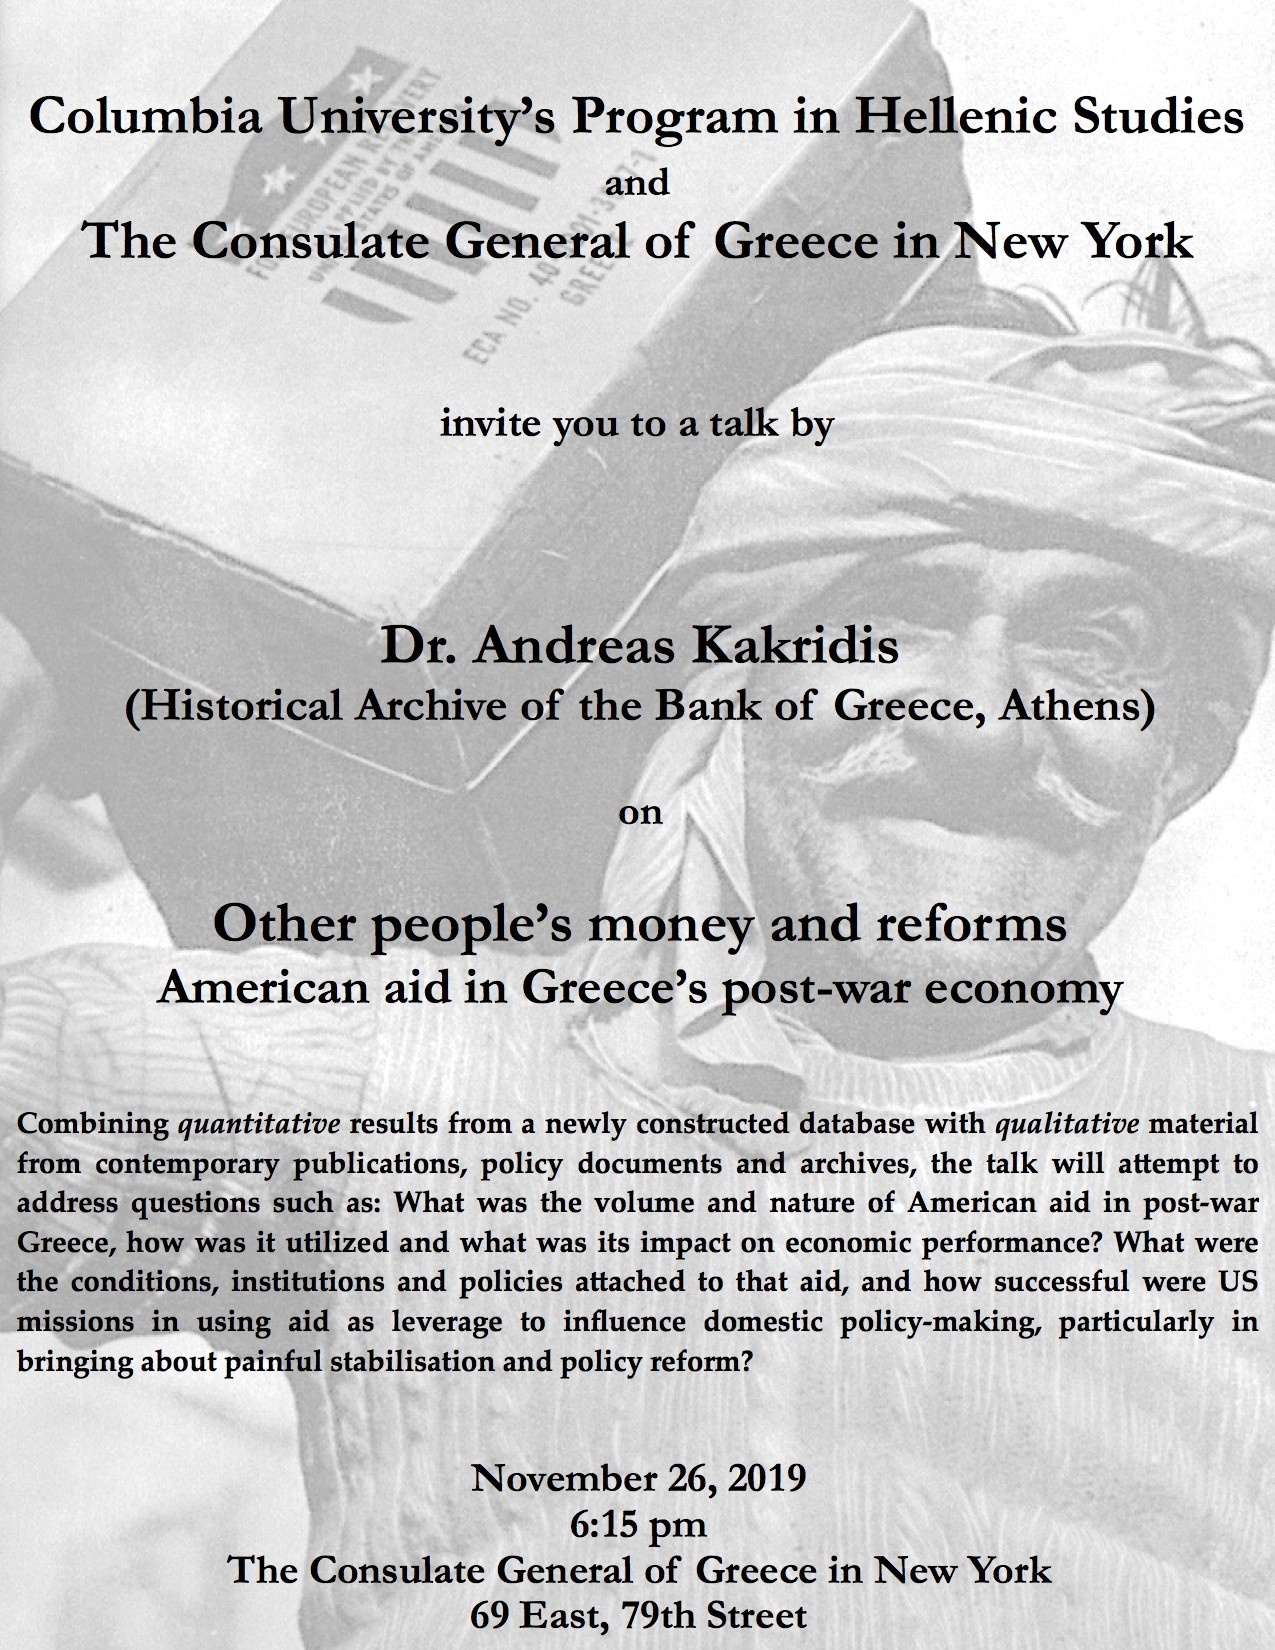 Other people’s money and reforms: American aid in Greece’s post-war economy